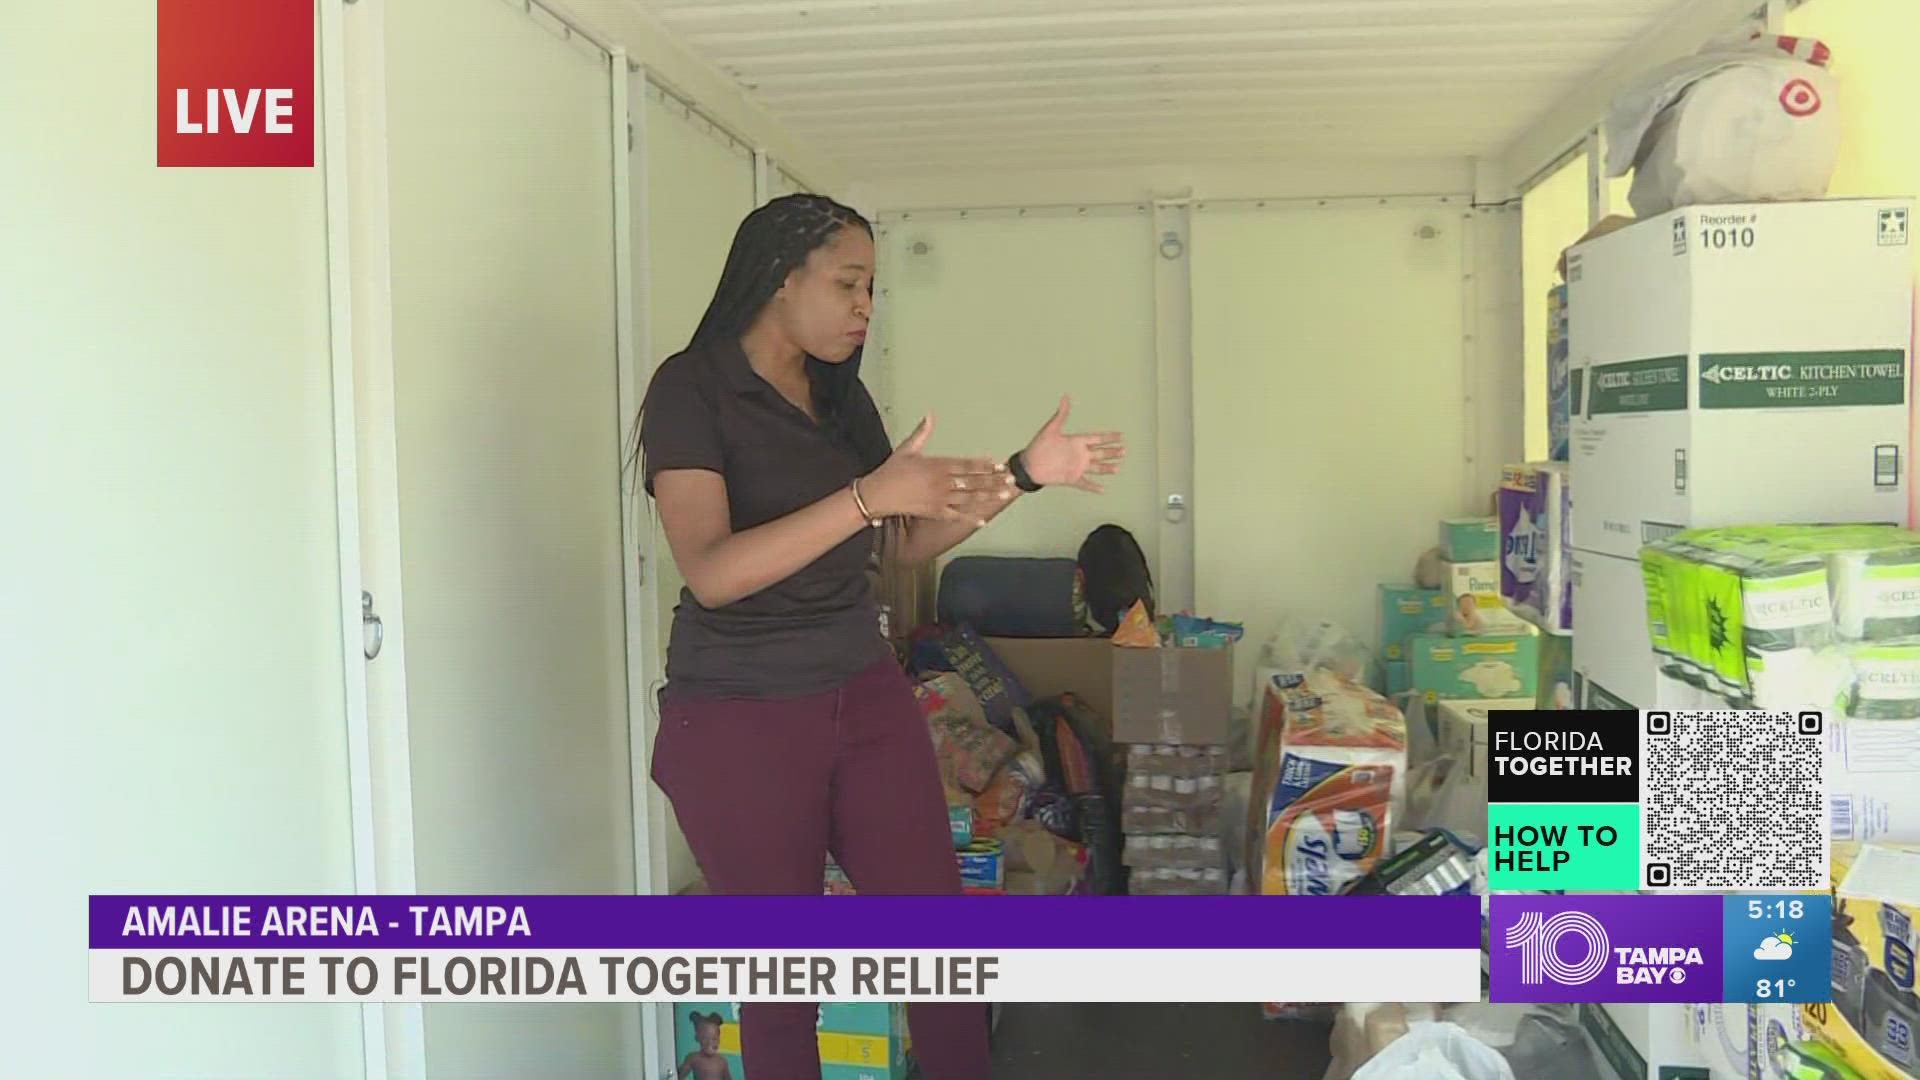 10 Tampa Bay is teaming up with the Tampa Bay Lightning and Cox radio stations to raise money and collect supplies for people suffering from Hurricane Ian.